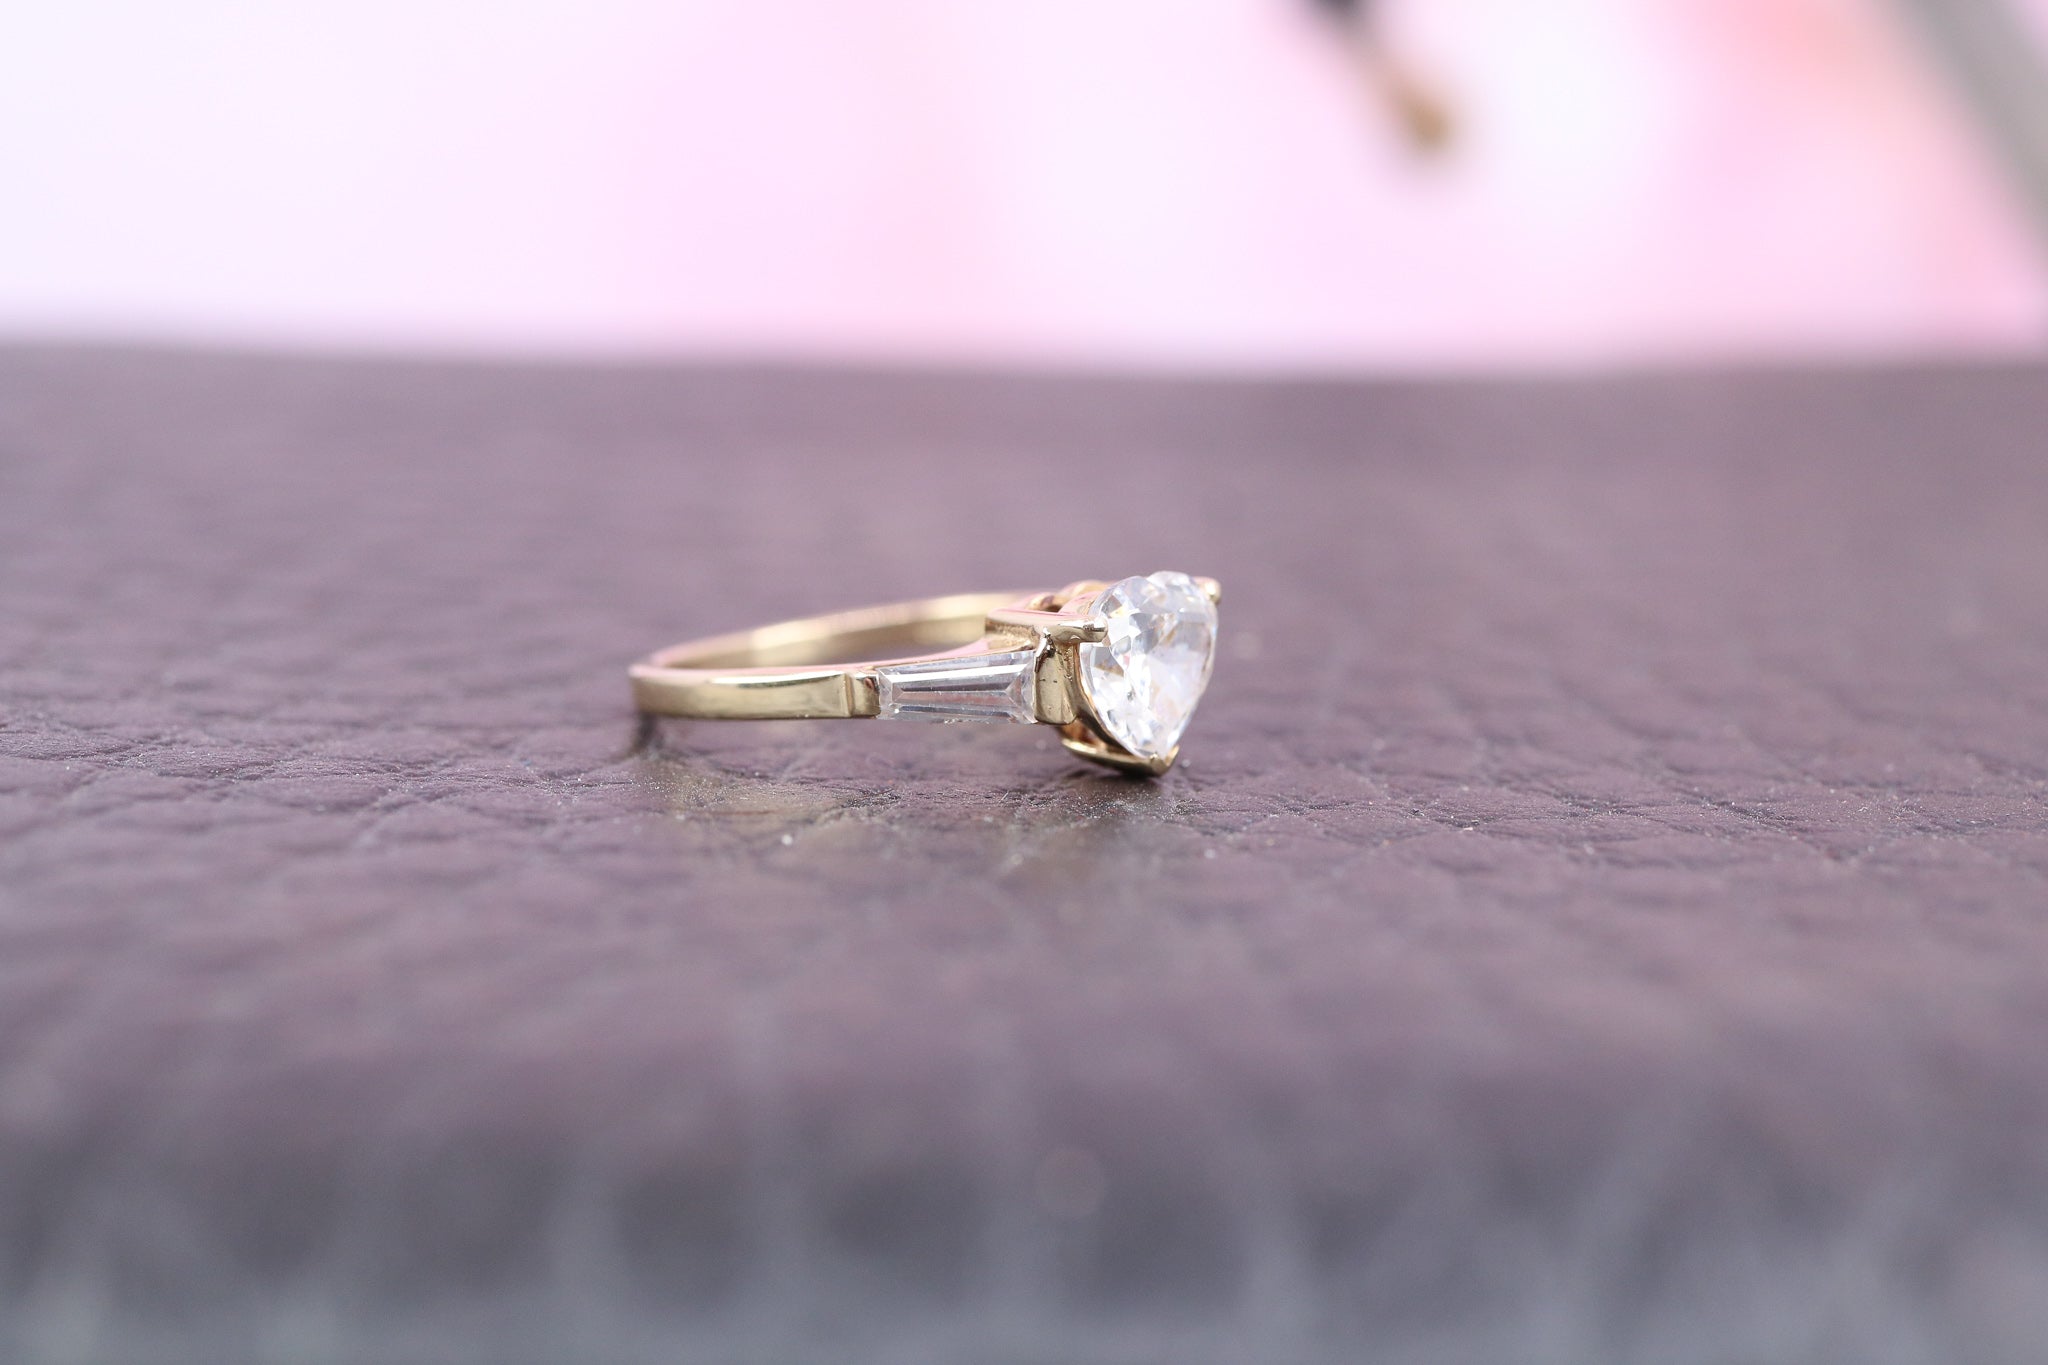 14ct Yellow Gold & CZ Ring - HJ2567 - Hallmark Jewellers Formby & The Jewellers Bench Widnes